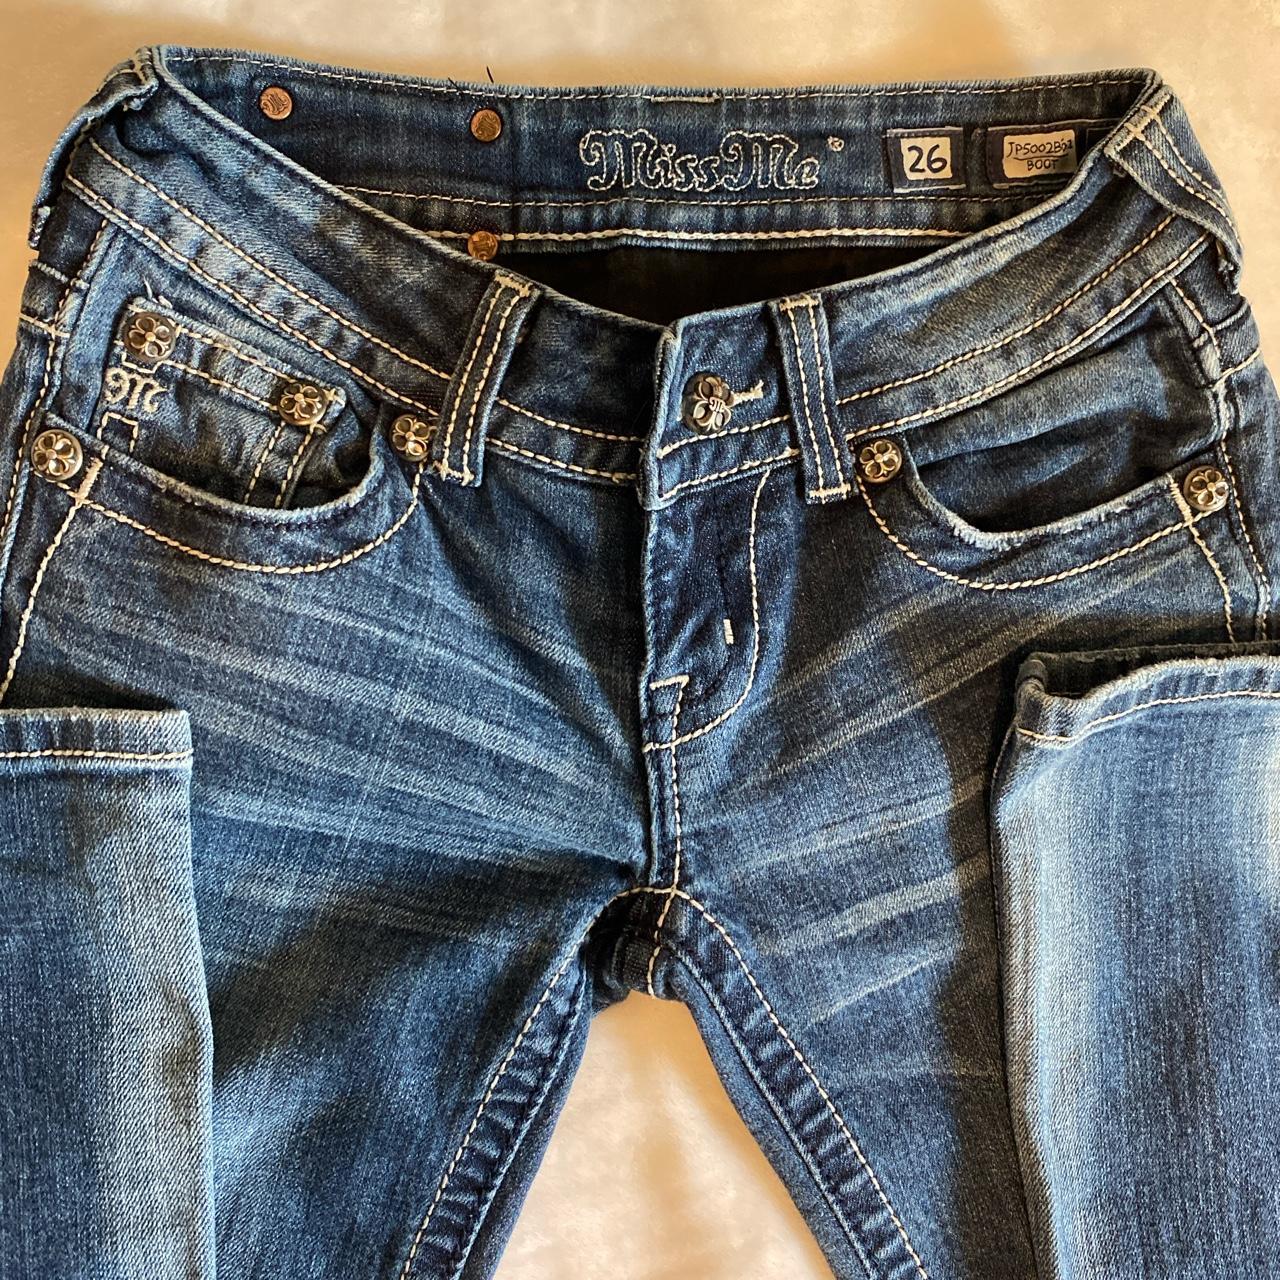 Miss me Bootcut Jeans size 26, missing one back button! - Depop